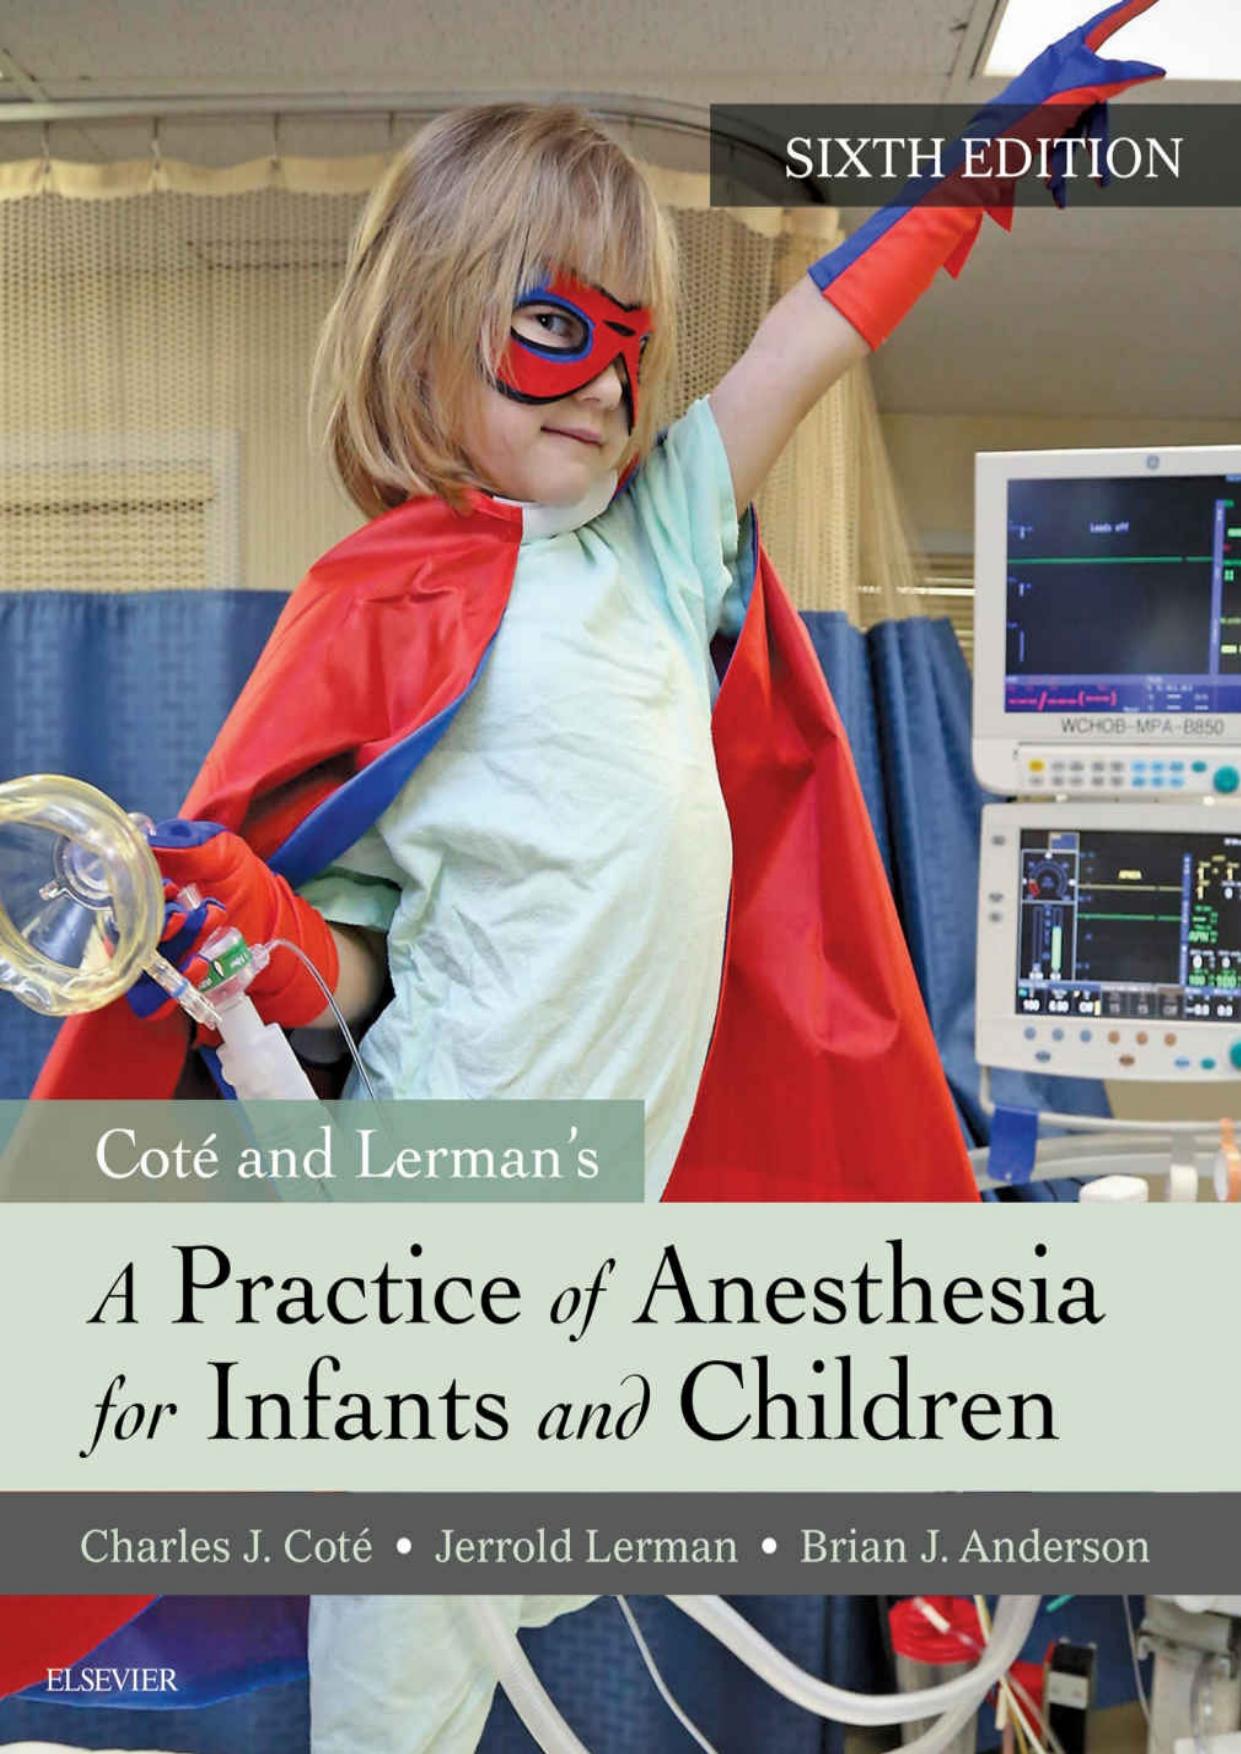 A Practice of Anesthesia for Infants and Children E-Book